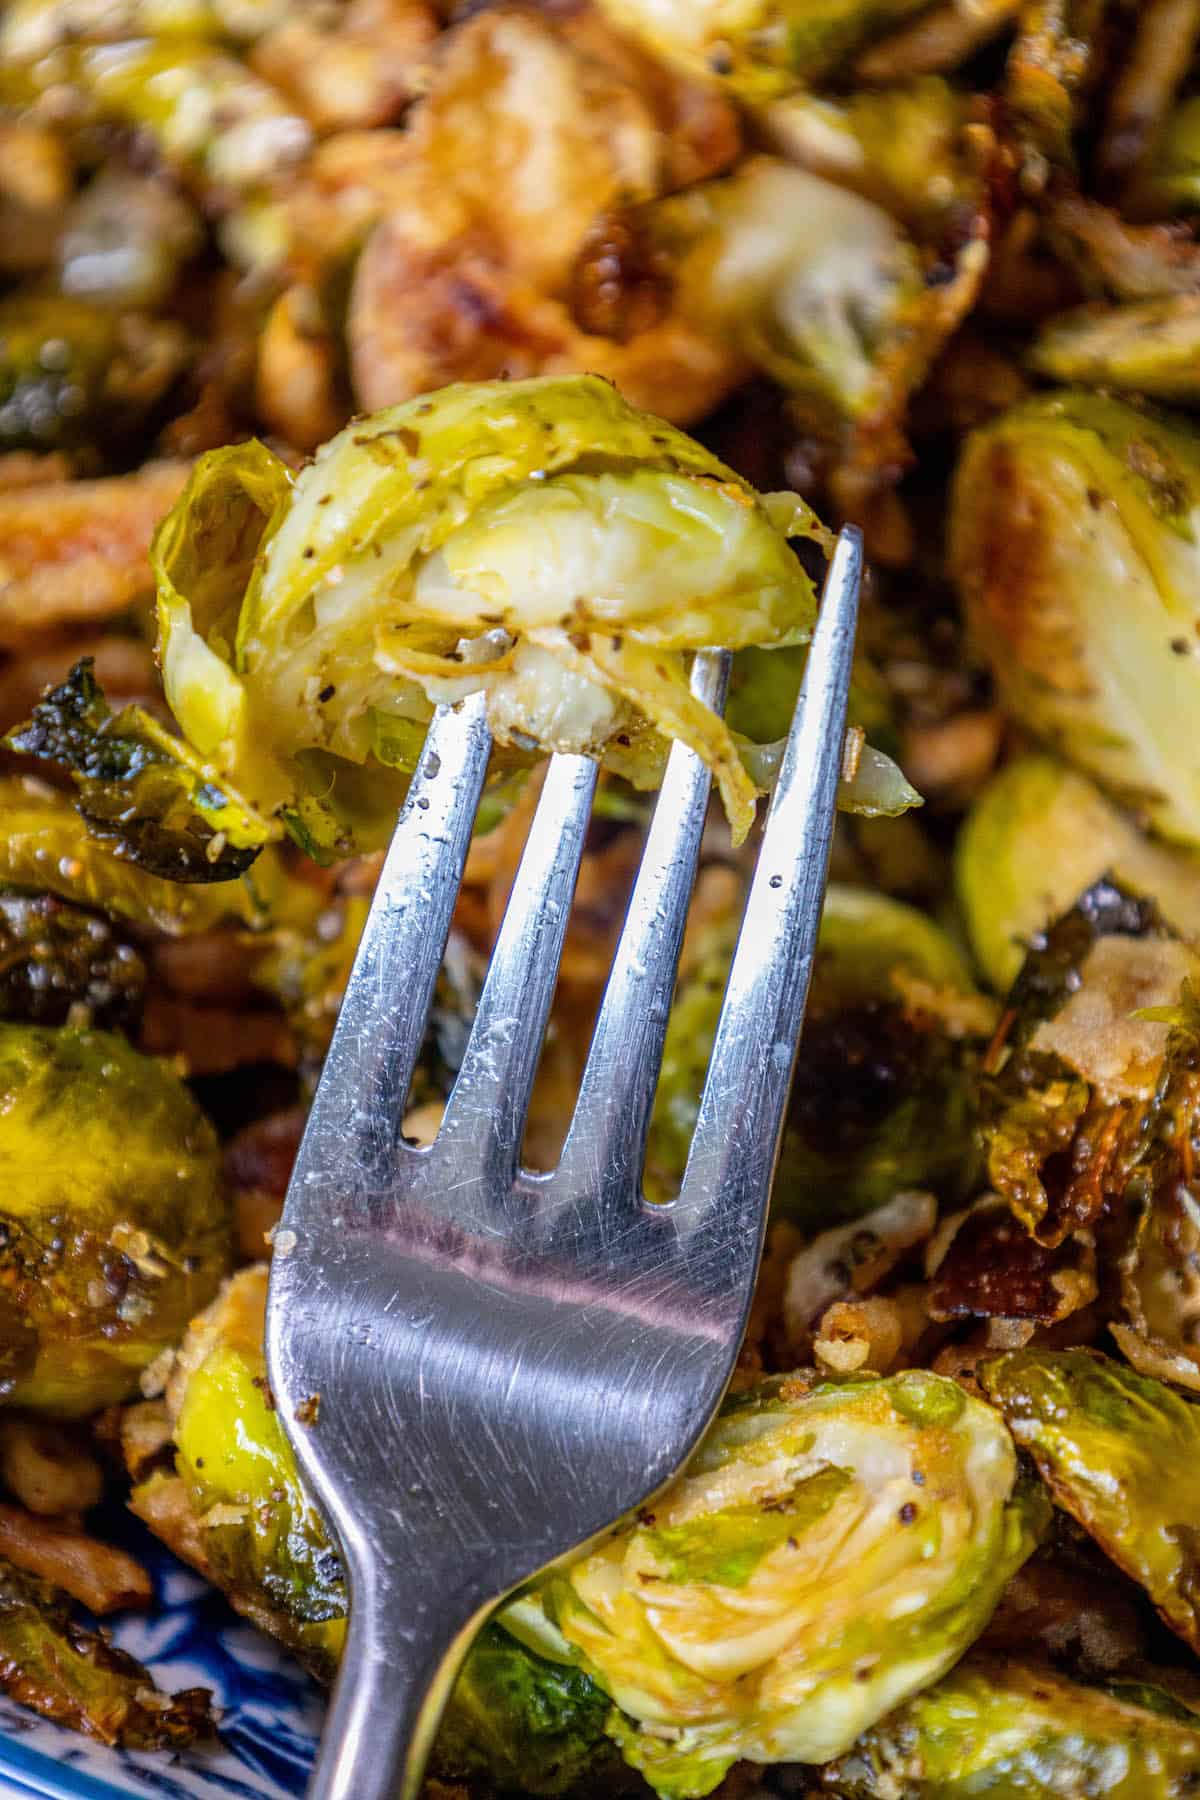 Roasted Brussels sprouts on a plate with a fork.